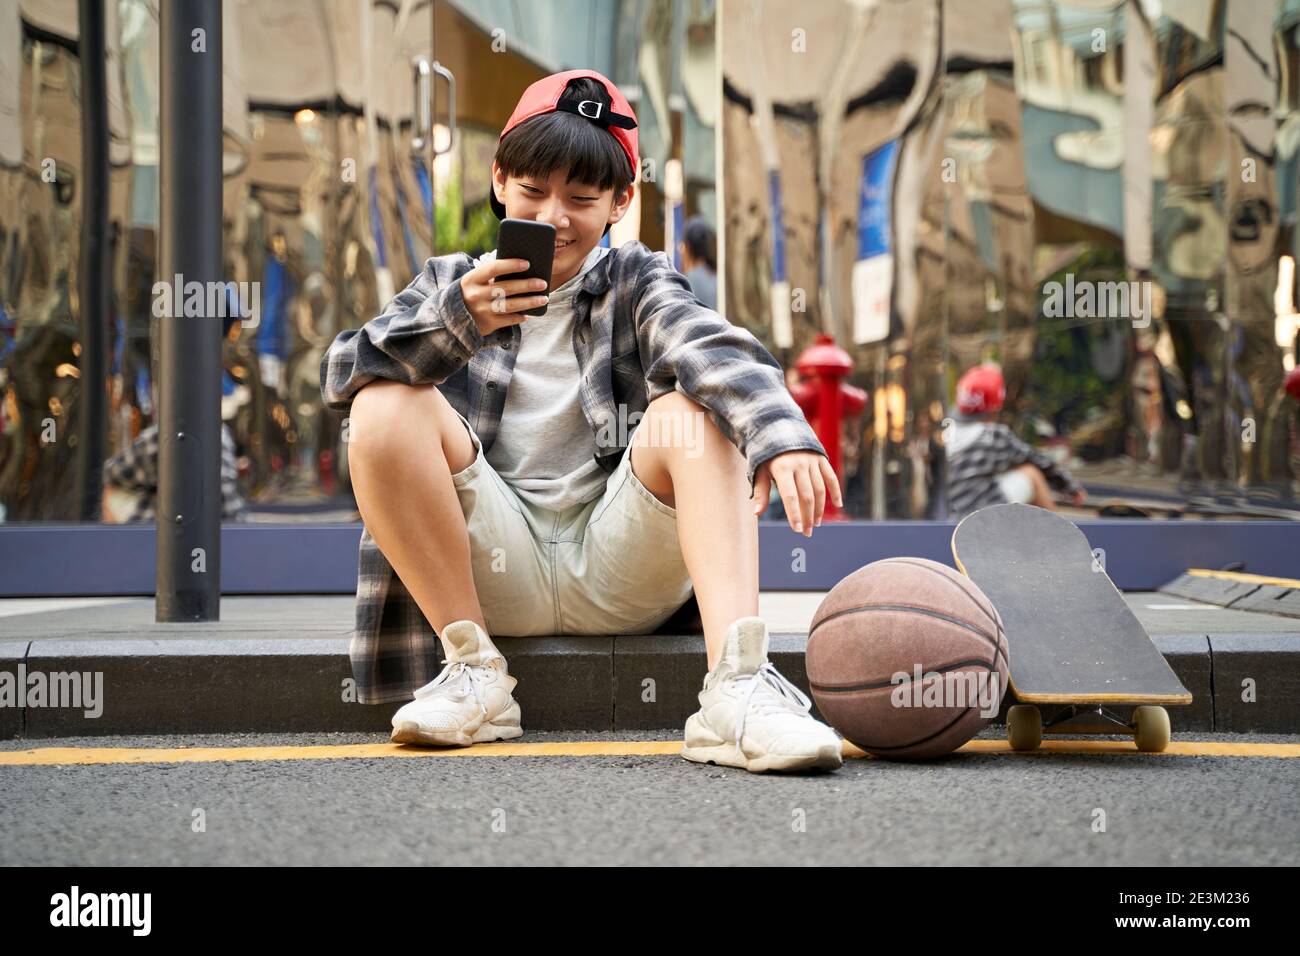 teenage asian kid with basketball and skateboard sitting on curb of street looking at cellphone Stock Photo